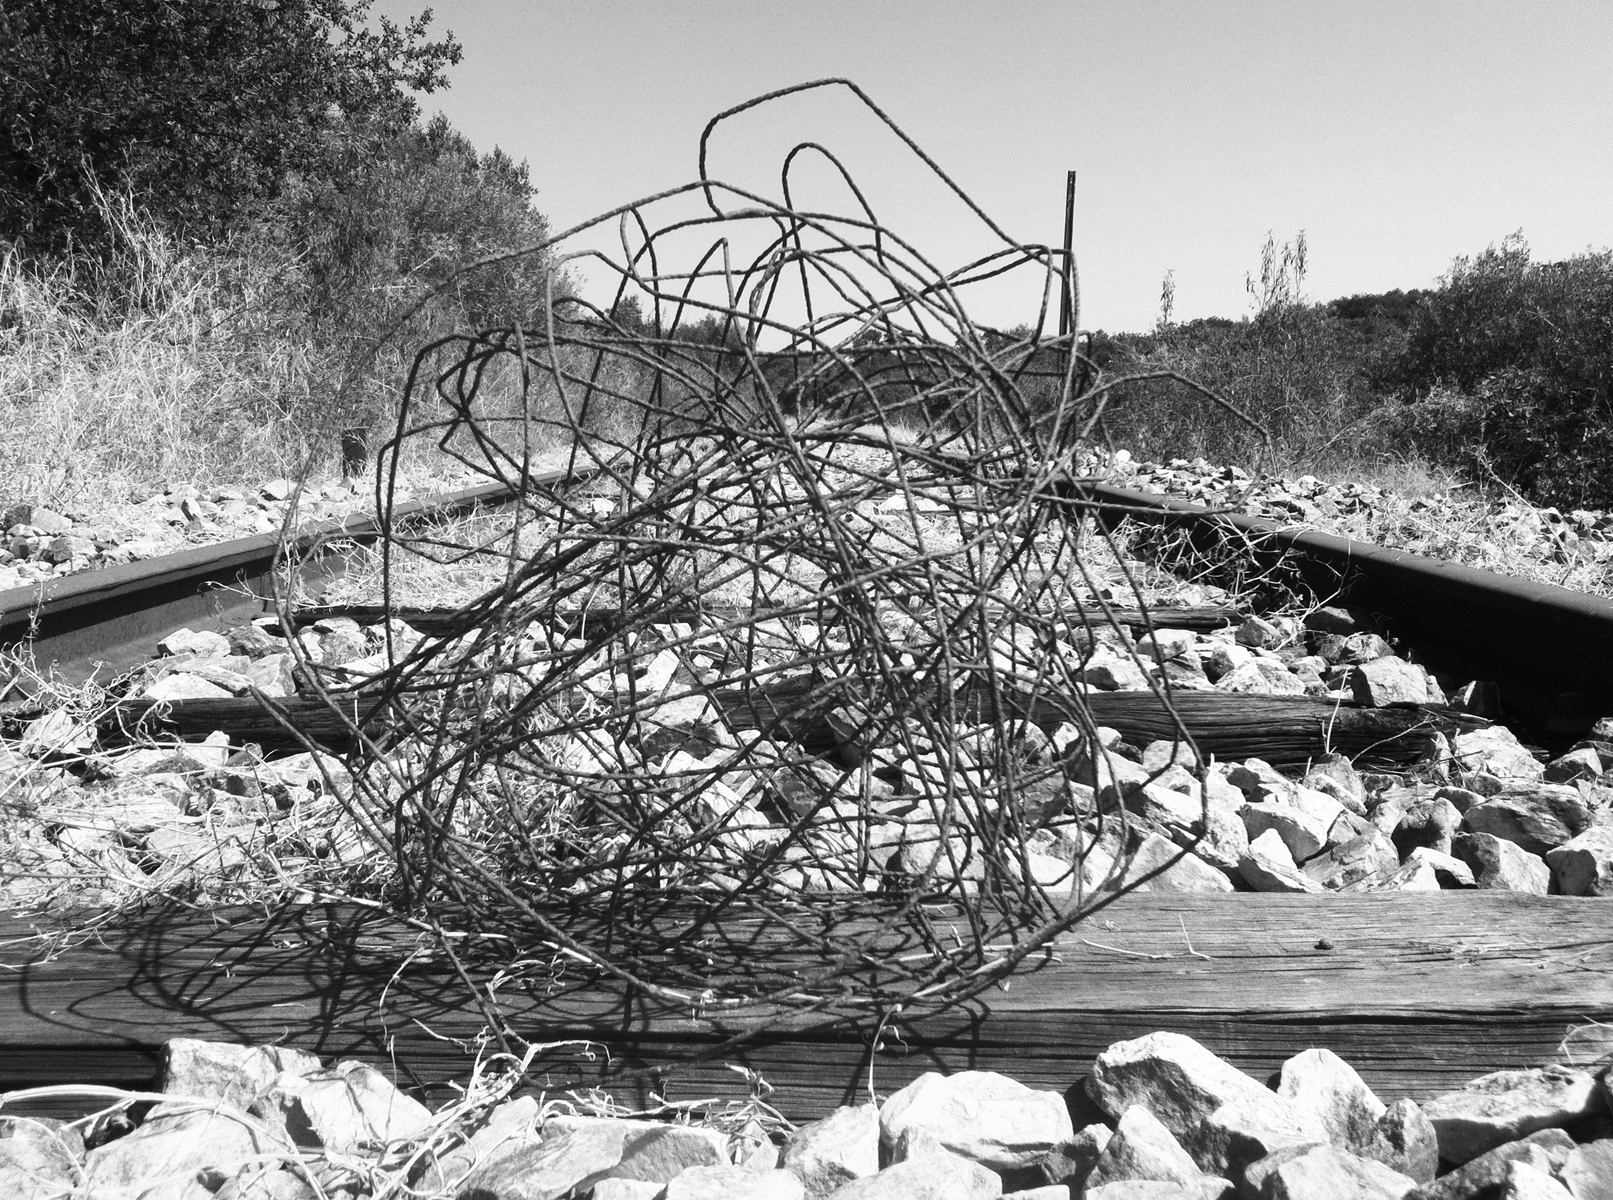 A ball of wire placed between old, receding railroad tracks in a dry rural setting.